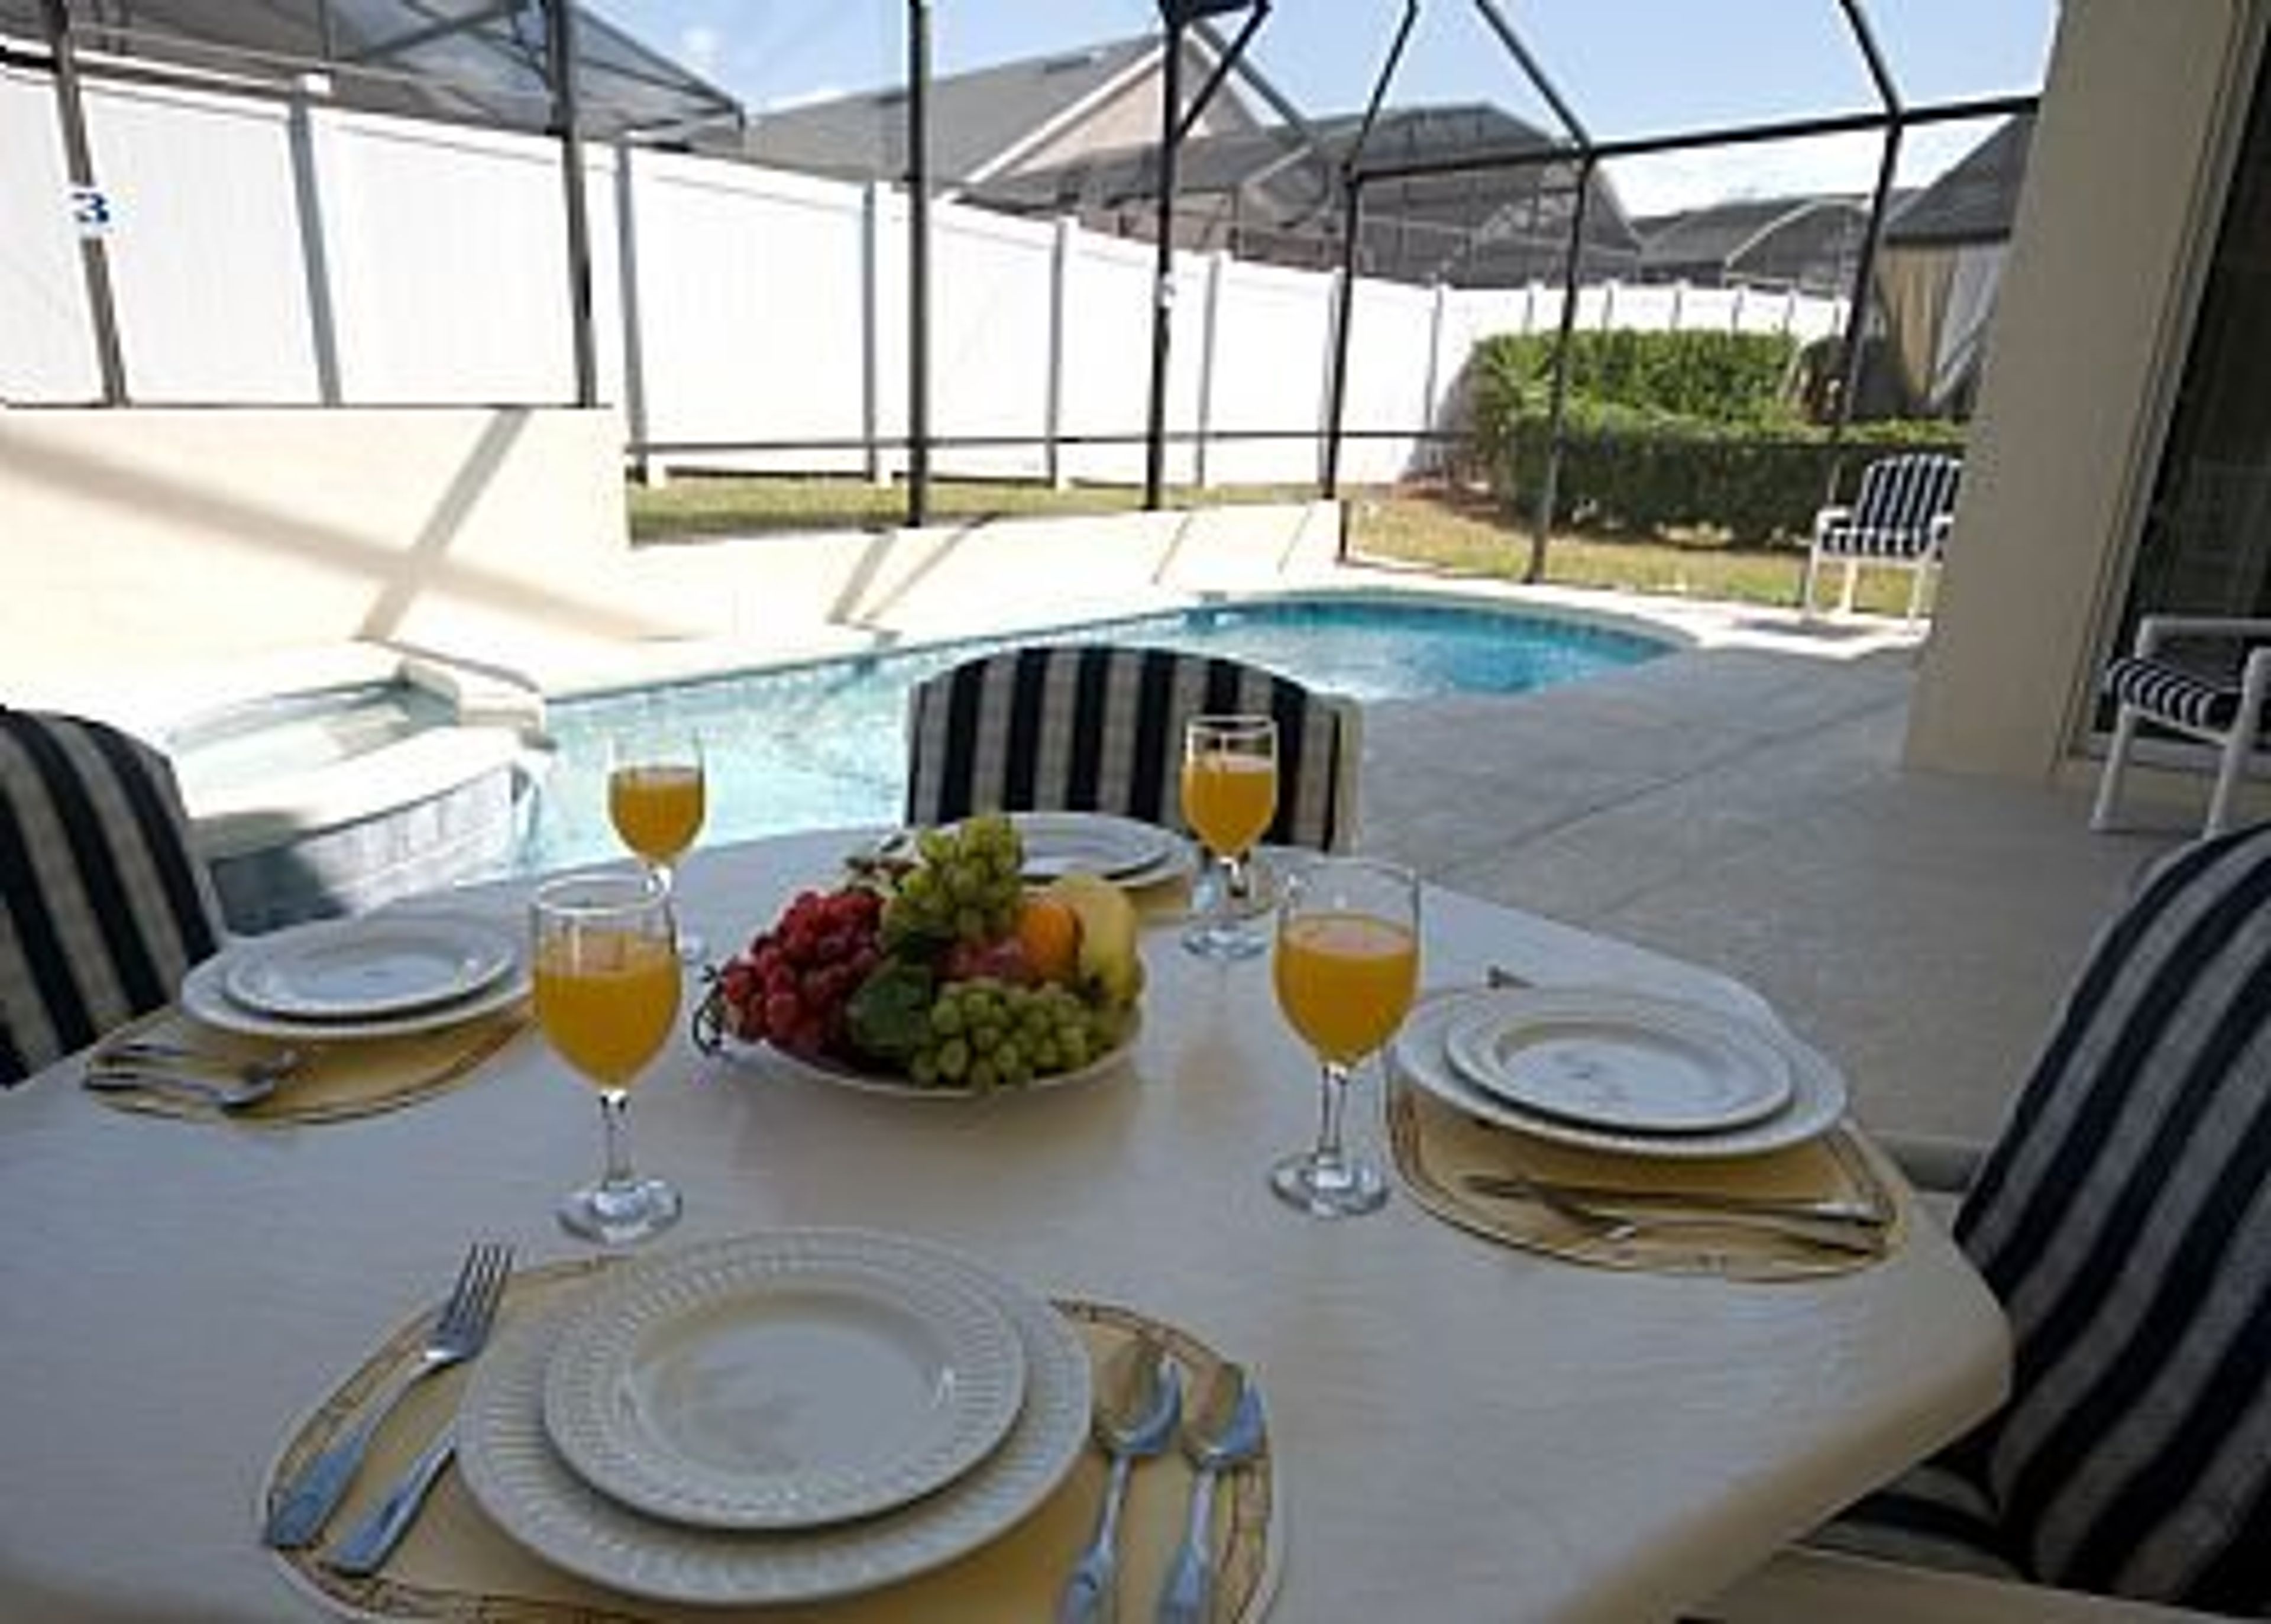 enjoy a meal on the fully furnished pool deck